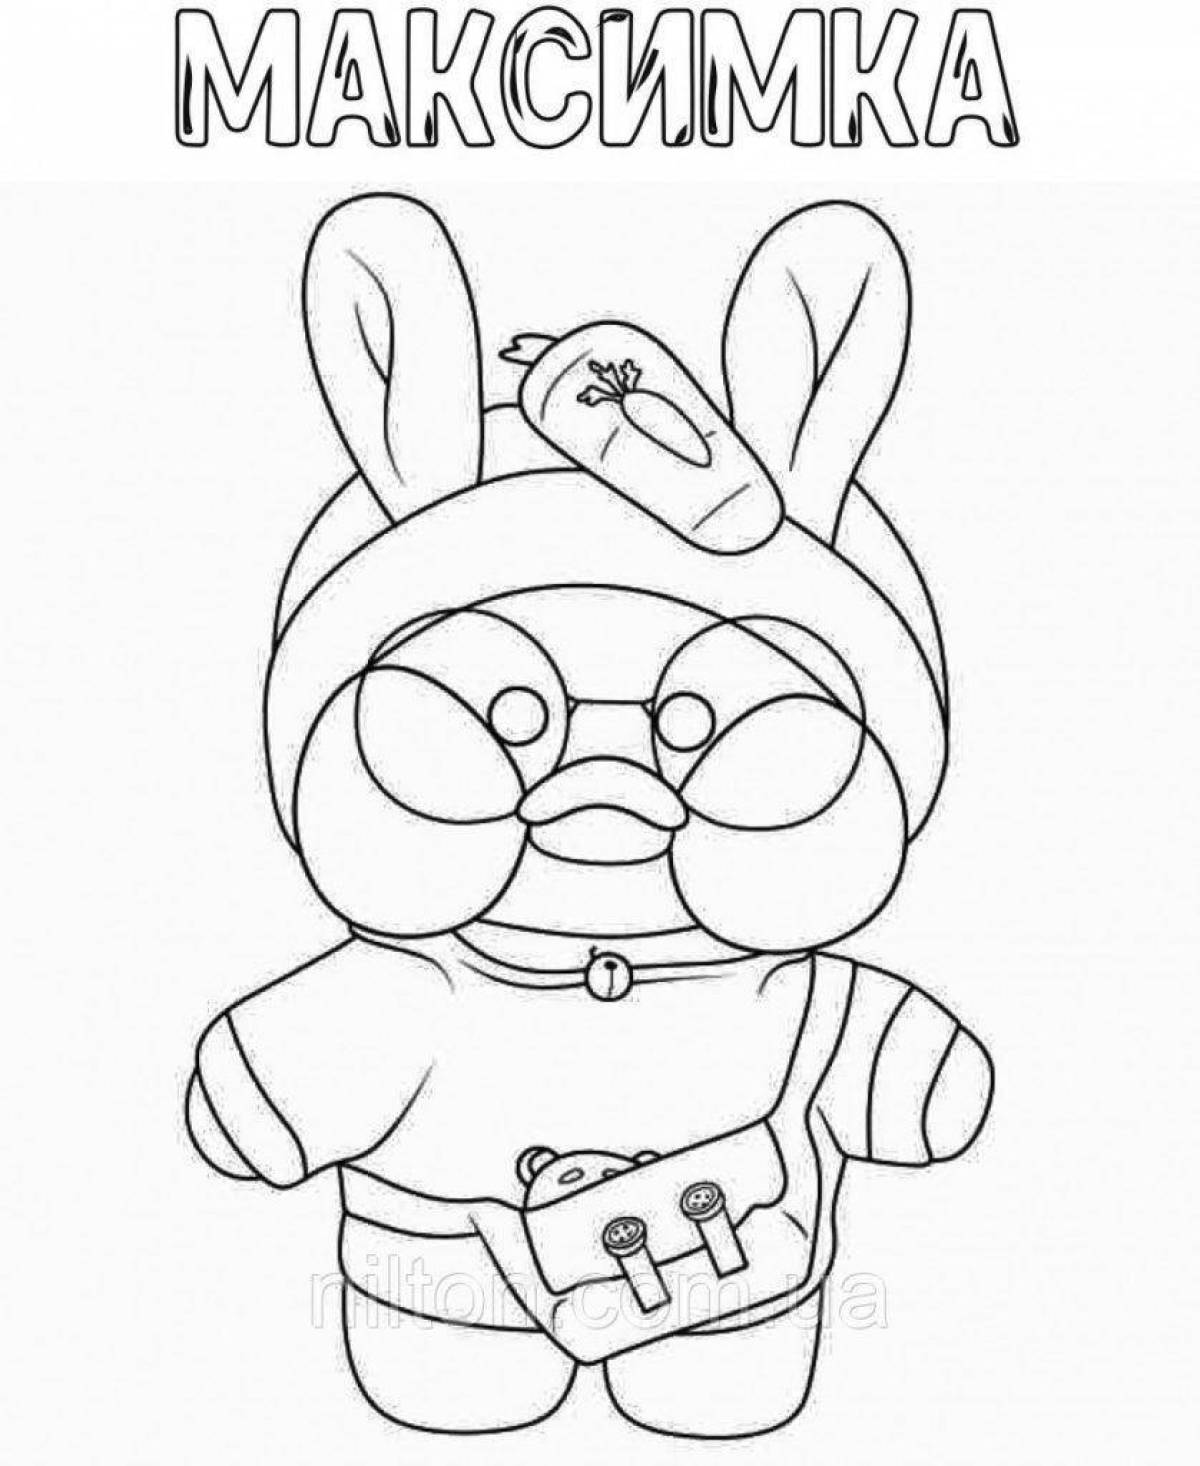 Amazing coloring page lola fanfan